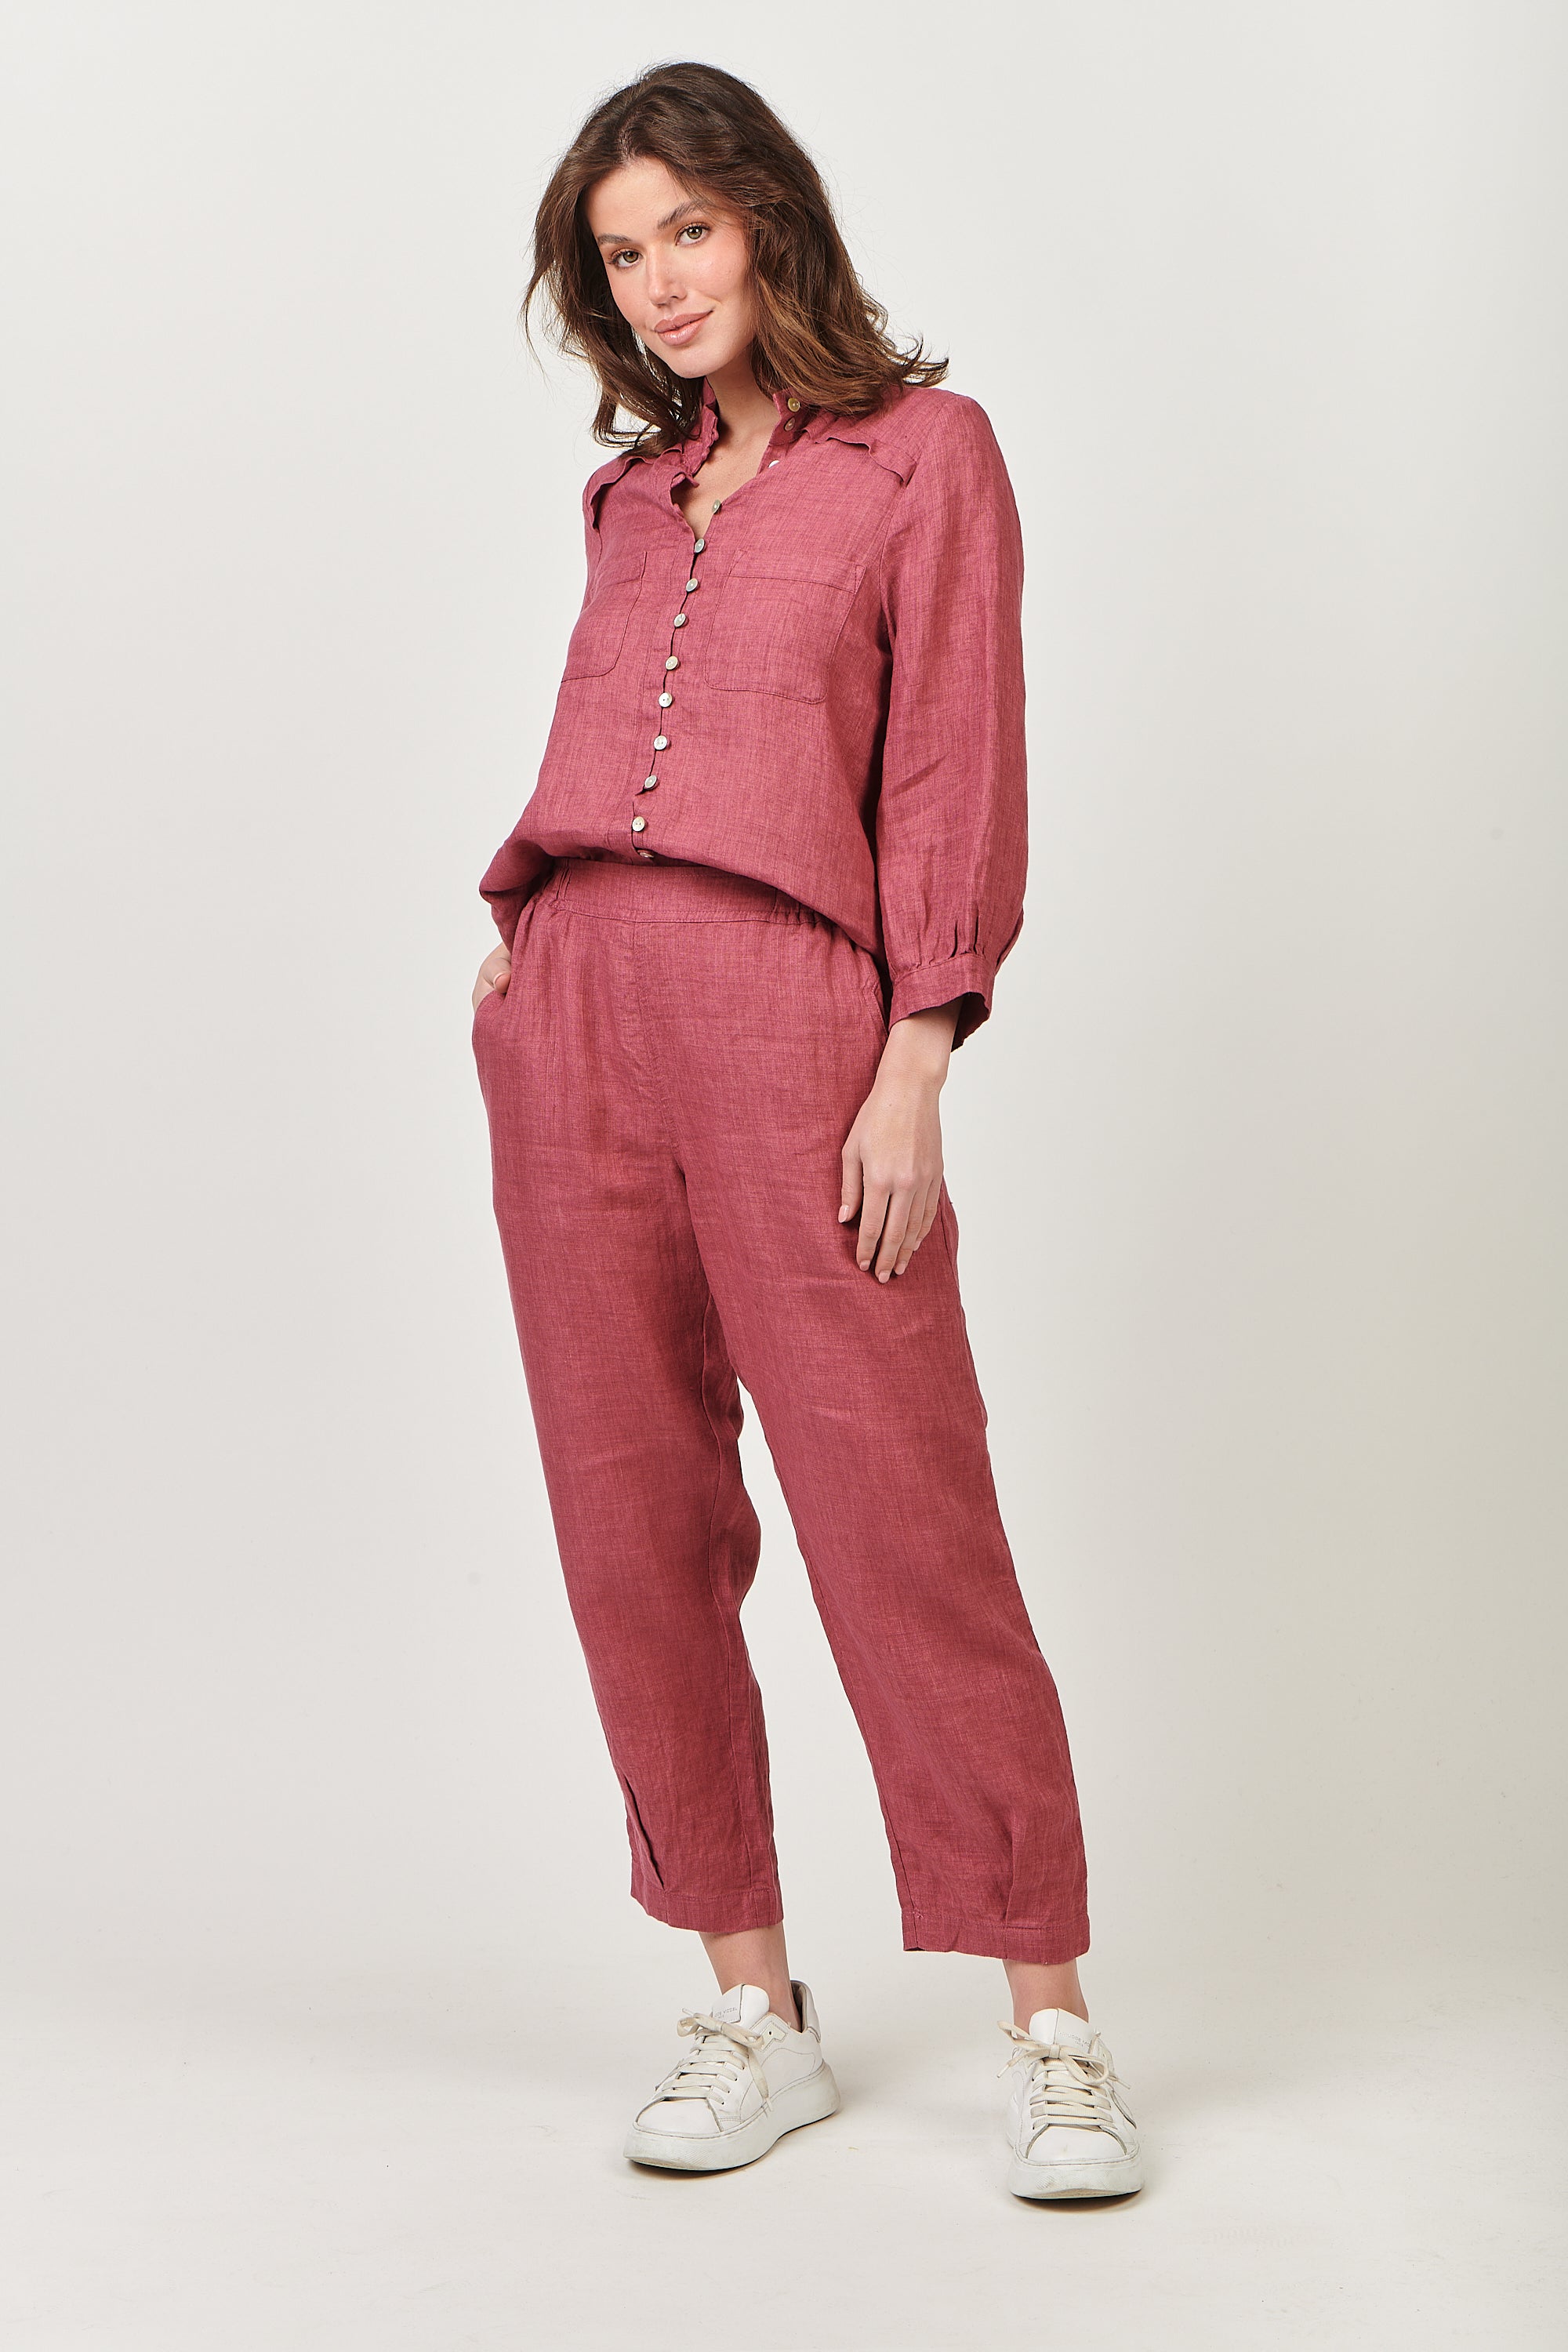 Linen High Neck Top - Rhubarb-Tops-Naturals by O&J-The Bay Room